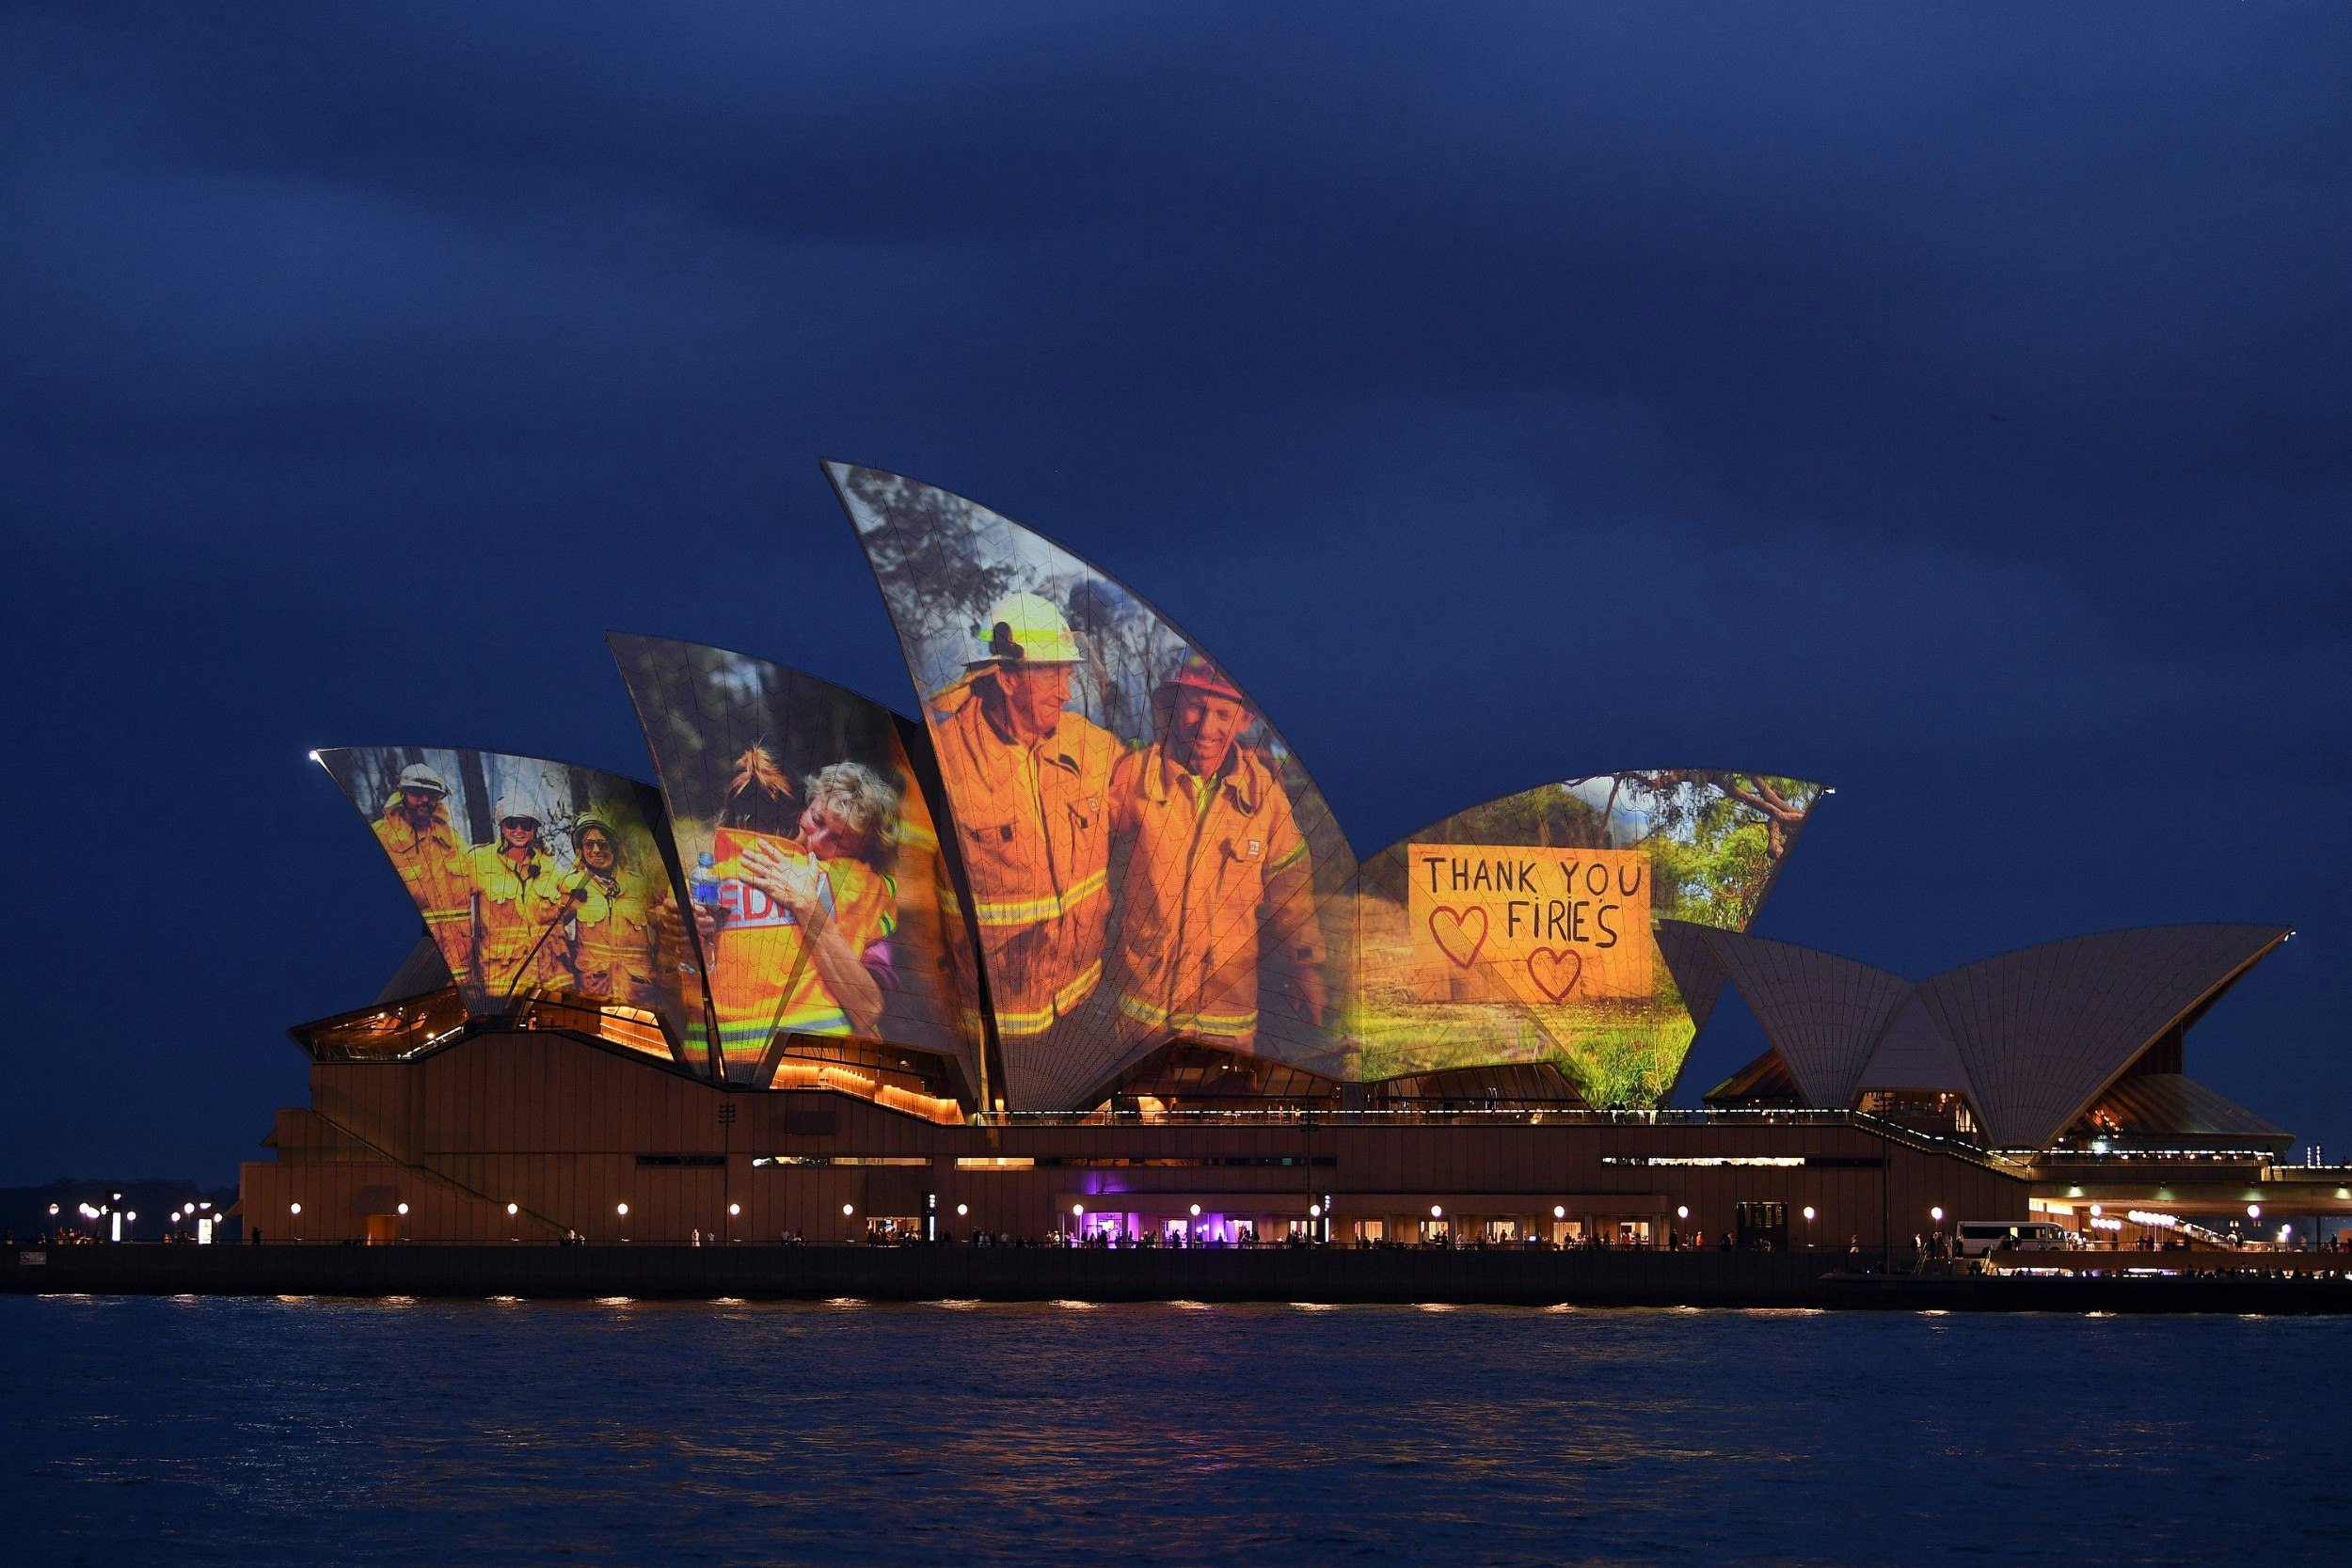 The Sydney Opera House lit up with a tribute to firefighters